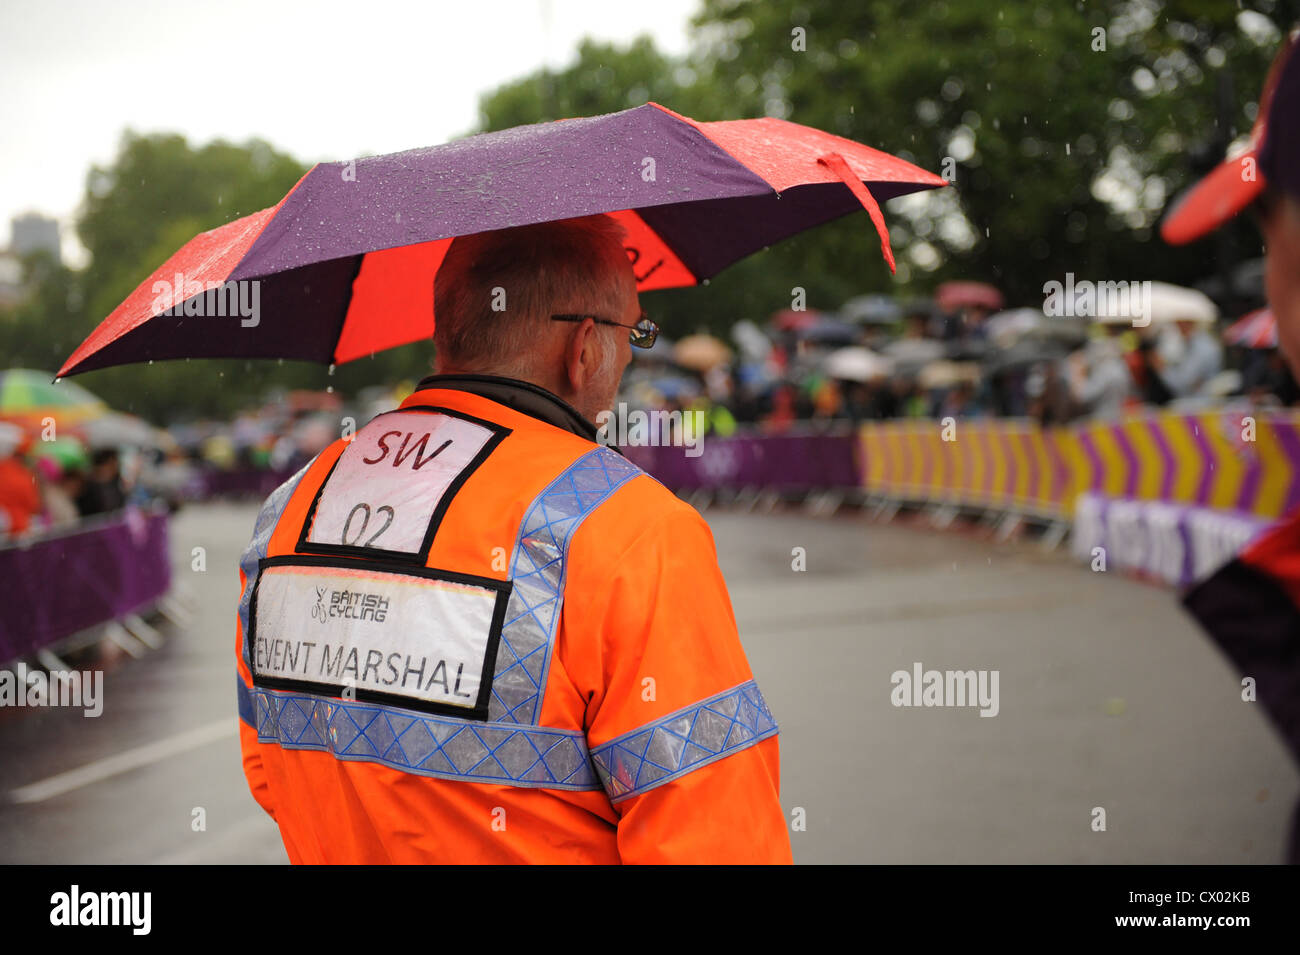 A race marshall at the cycling road race at the London 2012 Olympics Stock Photo